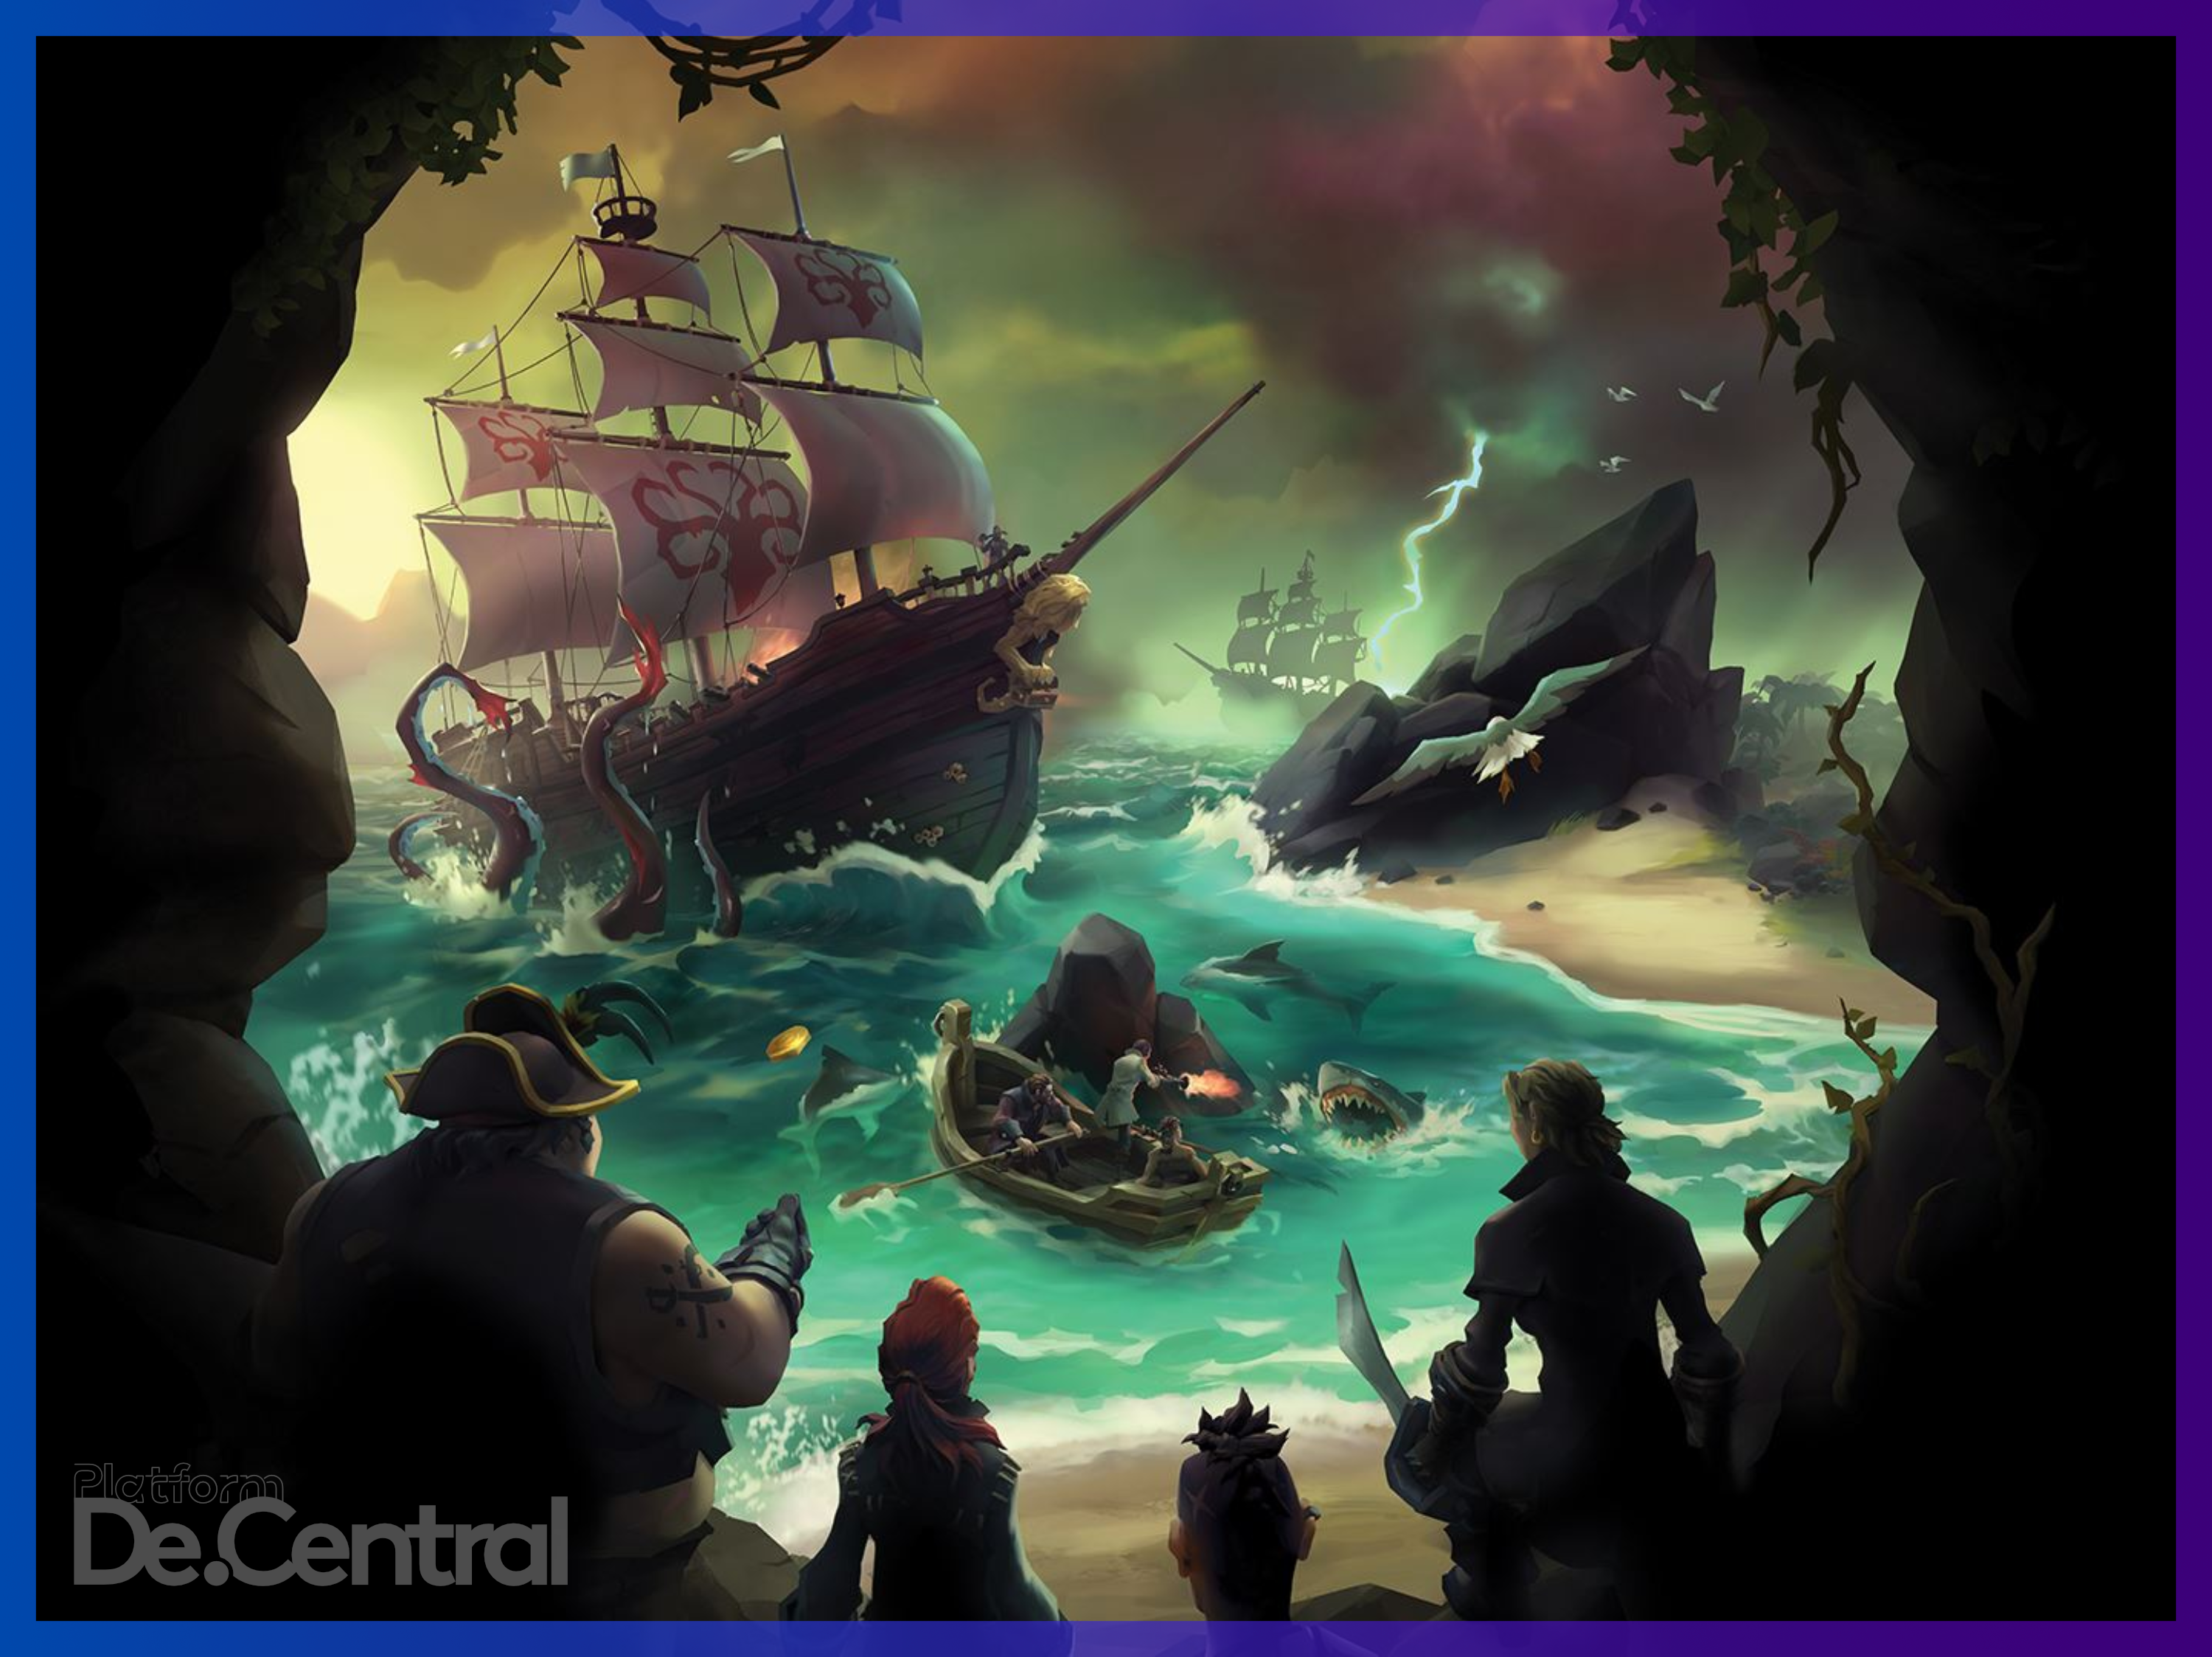 Sea of Thieves will be available from Steam as well as the Microsoft Store